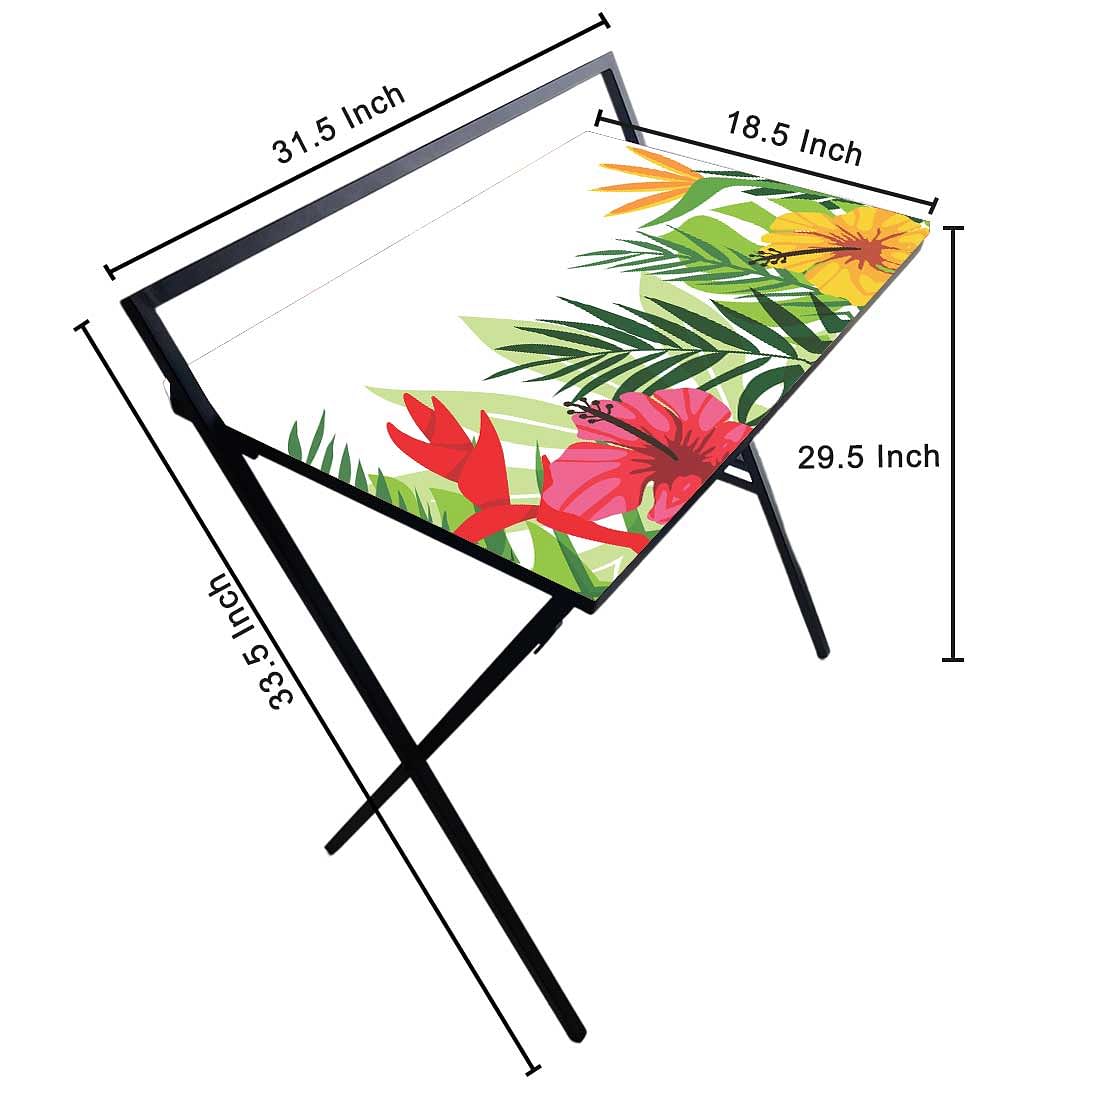 Study Table Foldable Work Table for Home Bedroom-Garden Nutcase